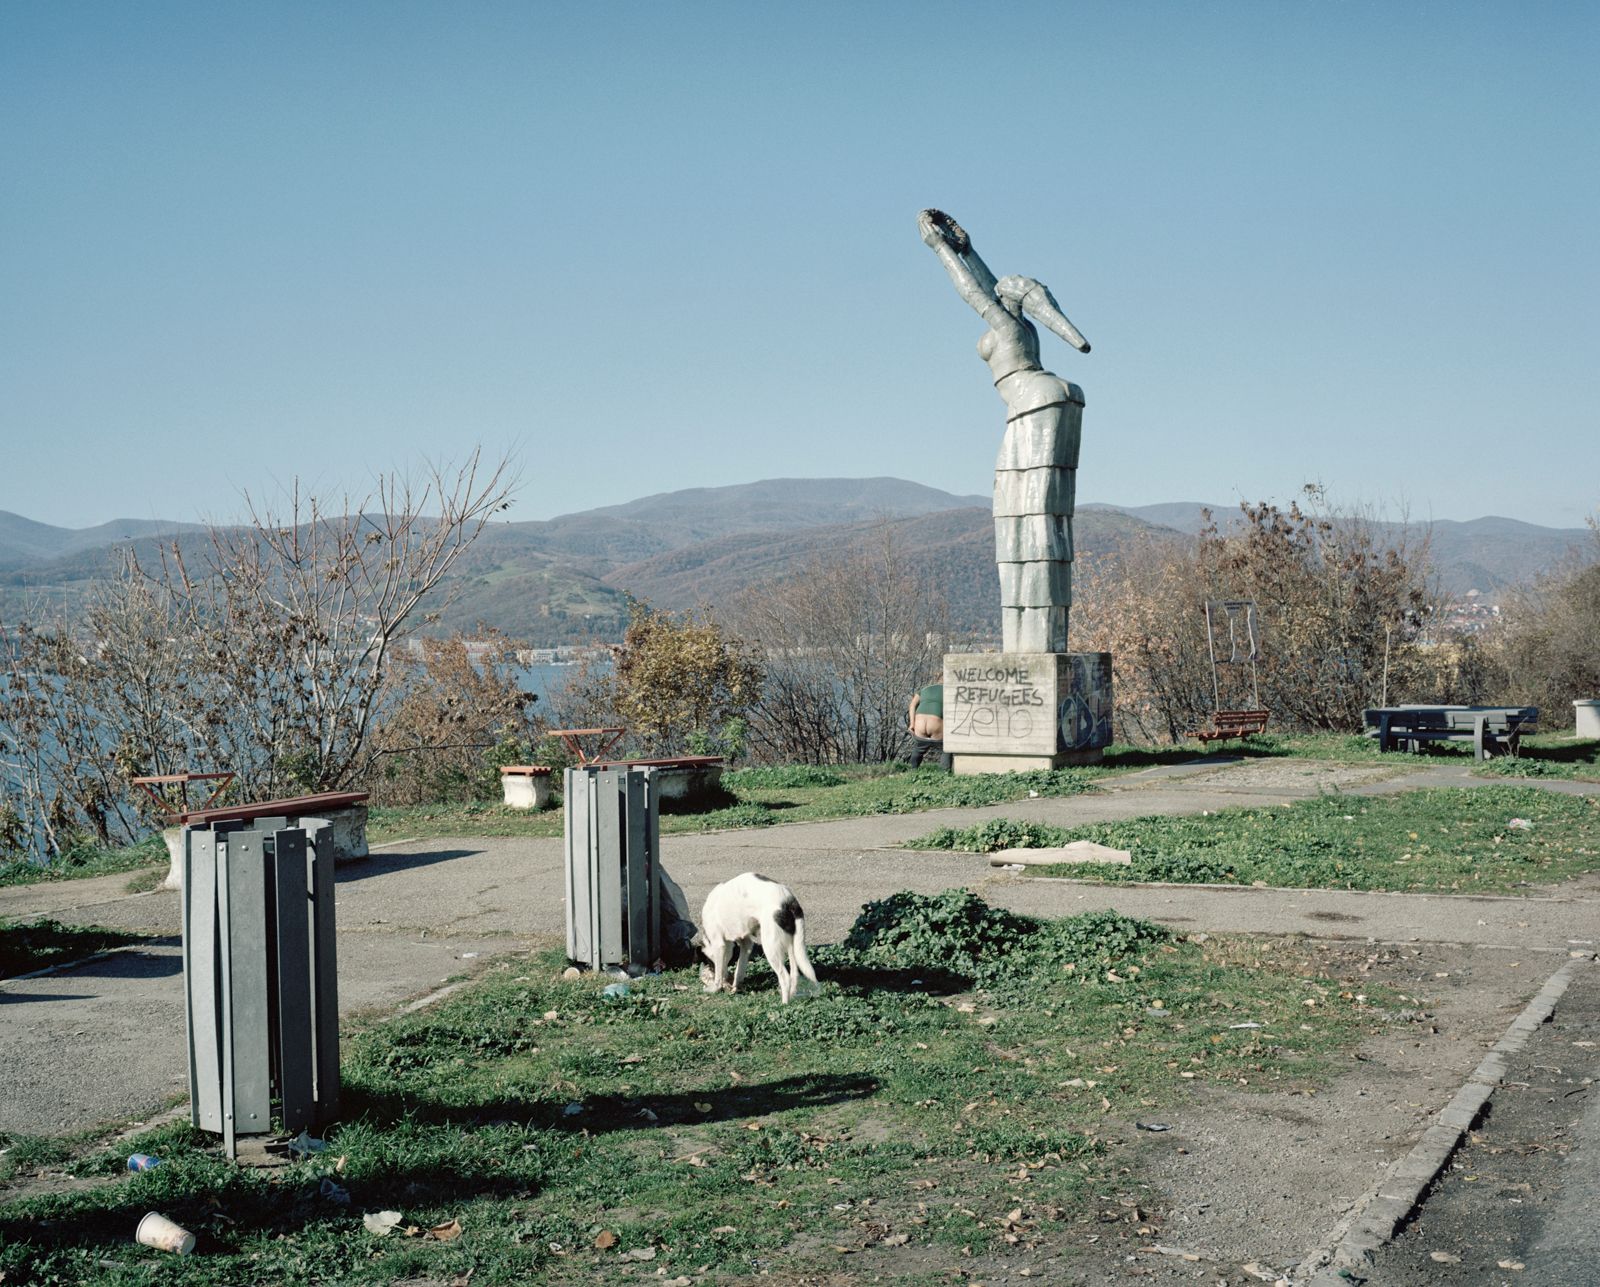 © Tommaso Rada - Romania, Orsova. A communist style monument with a wrote welcoming refugees